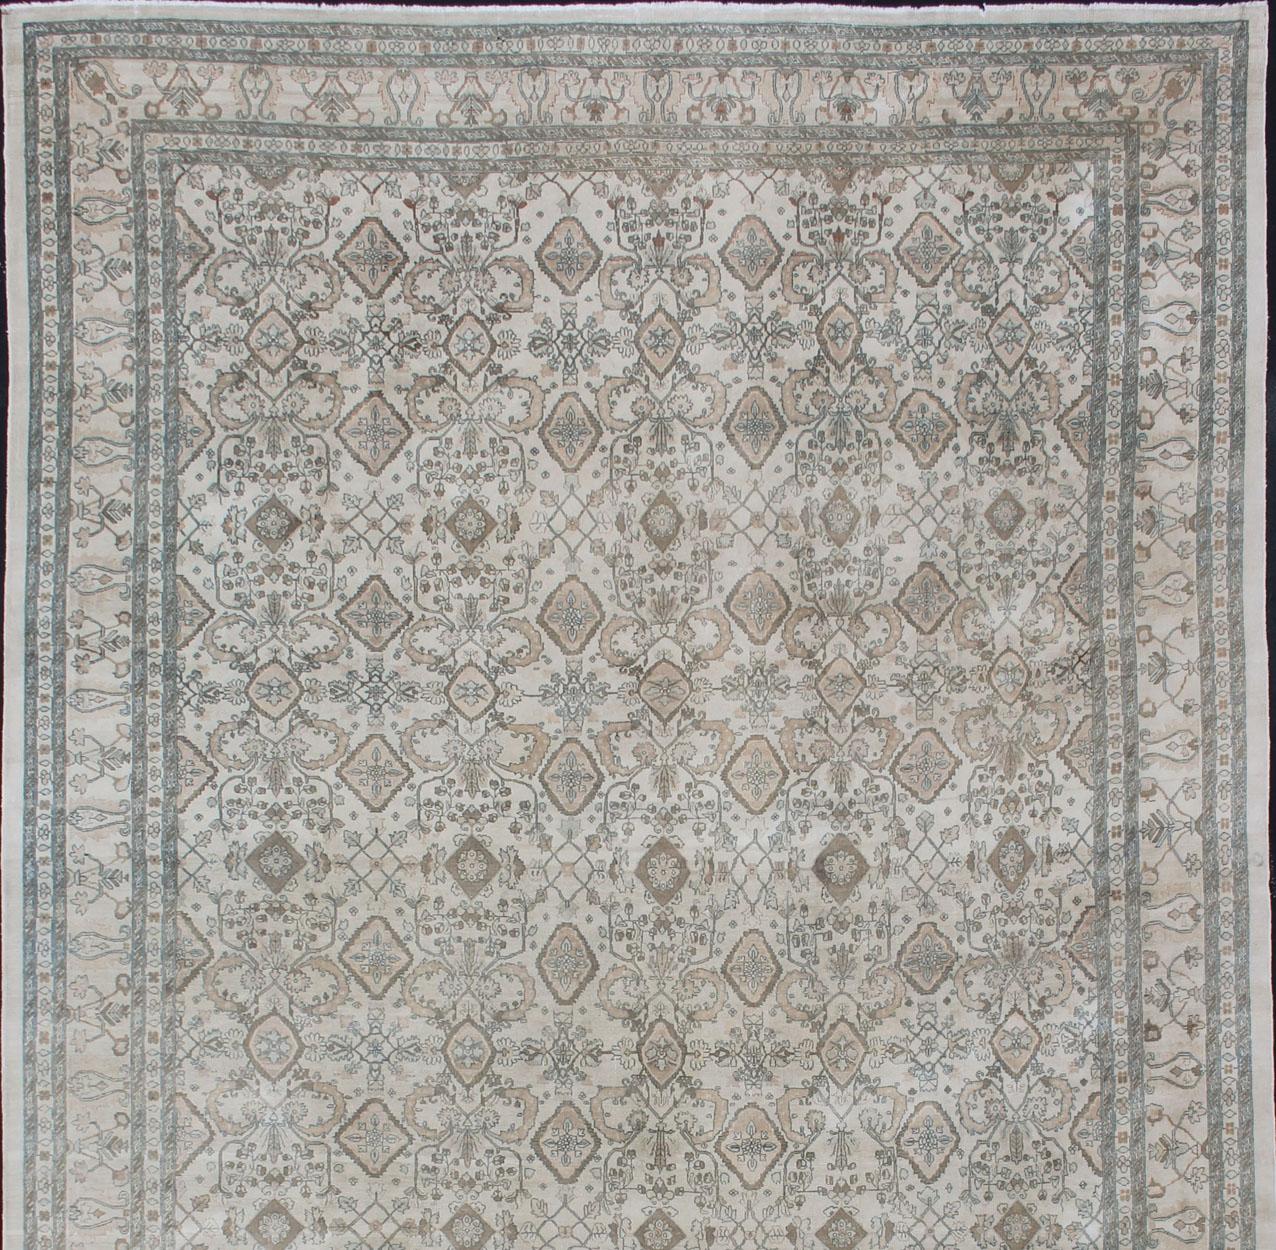 Vintage Sultanabad design rug in all over geometric with ivory background in light brown, blue, brown, charcoal, coral, salmon in sub-Geometric design, rug DSP878, country of origin / type: Iran / Sultanabad, circa 1970.

Measures: 16' x